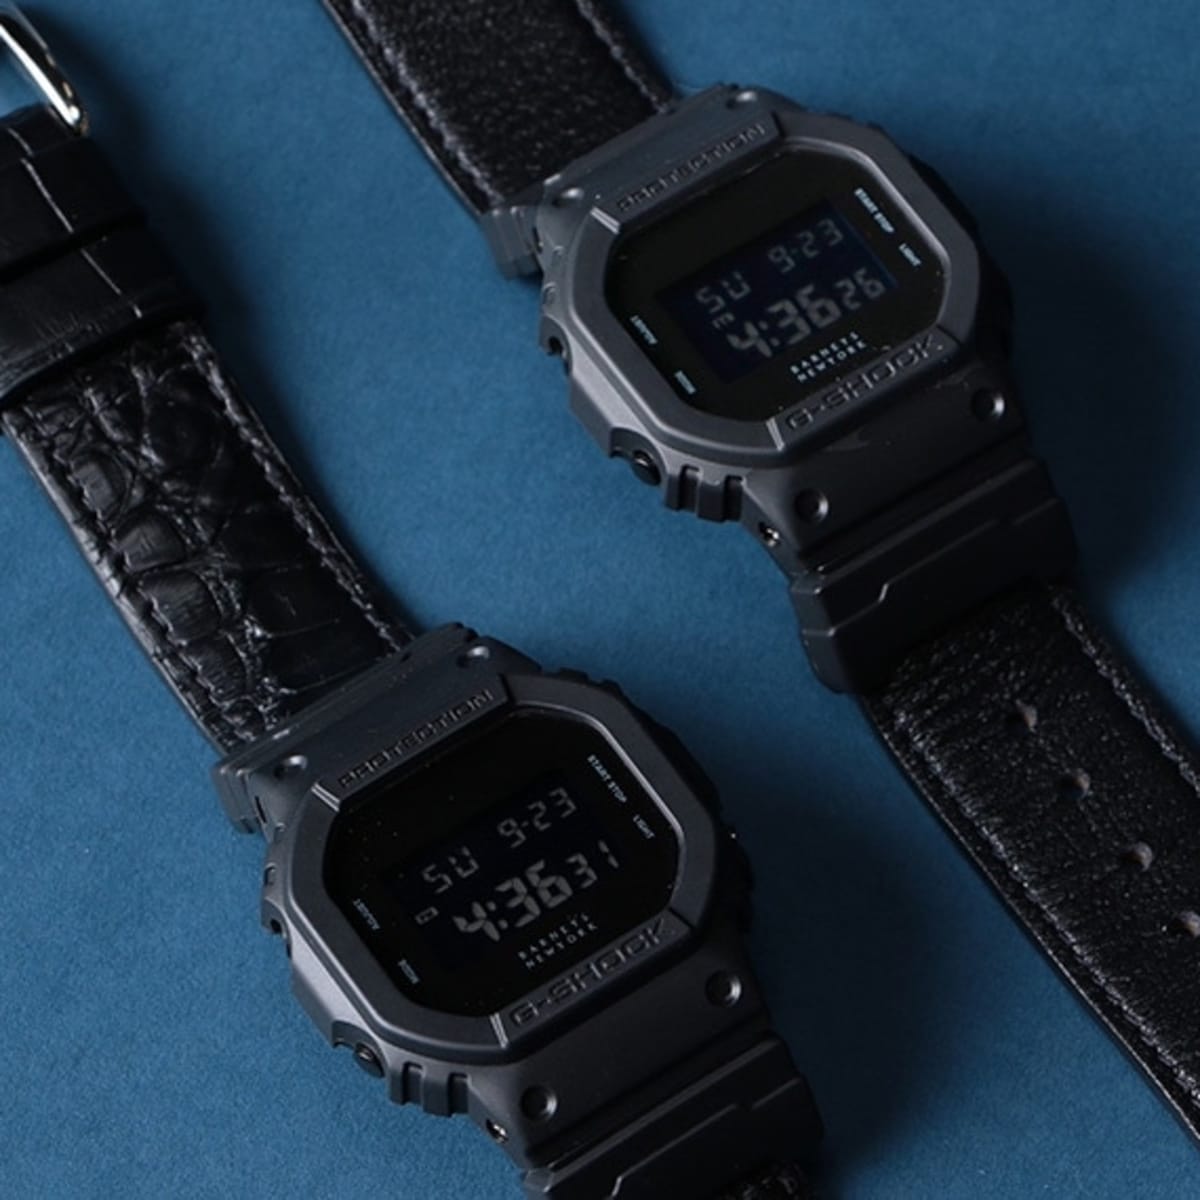 Barneys Japan releases a special edition of the G-Shock DW-5600